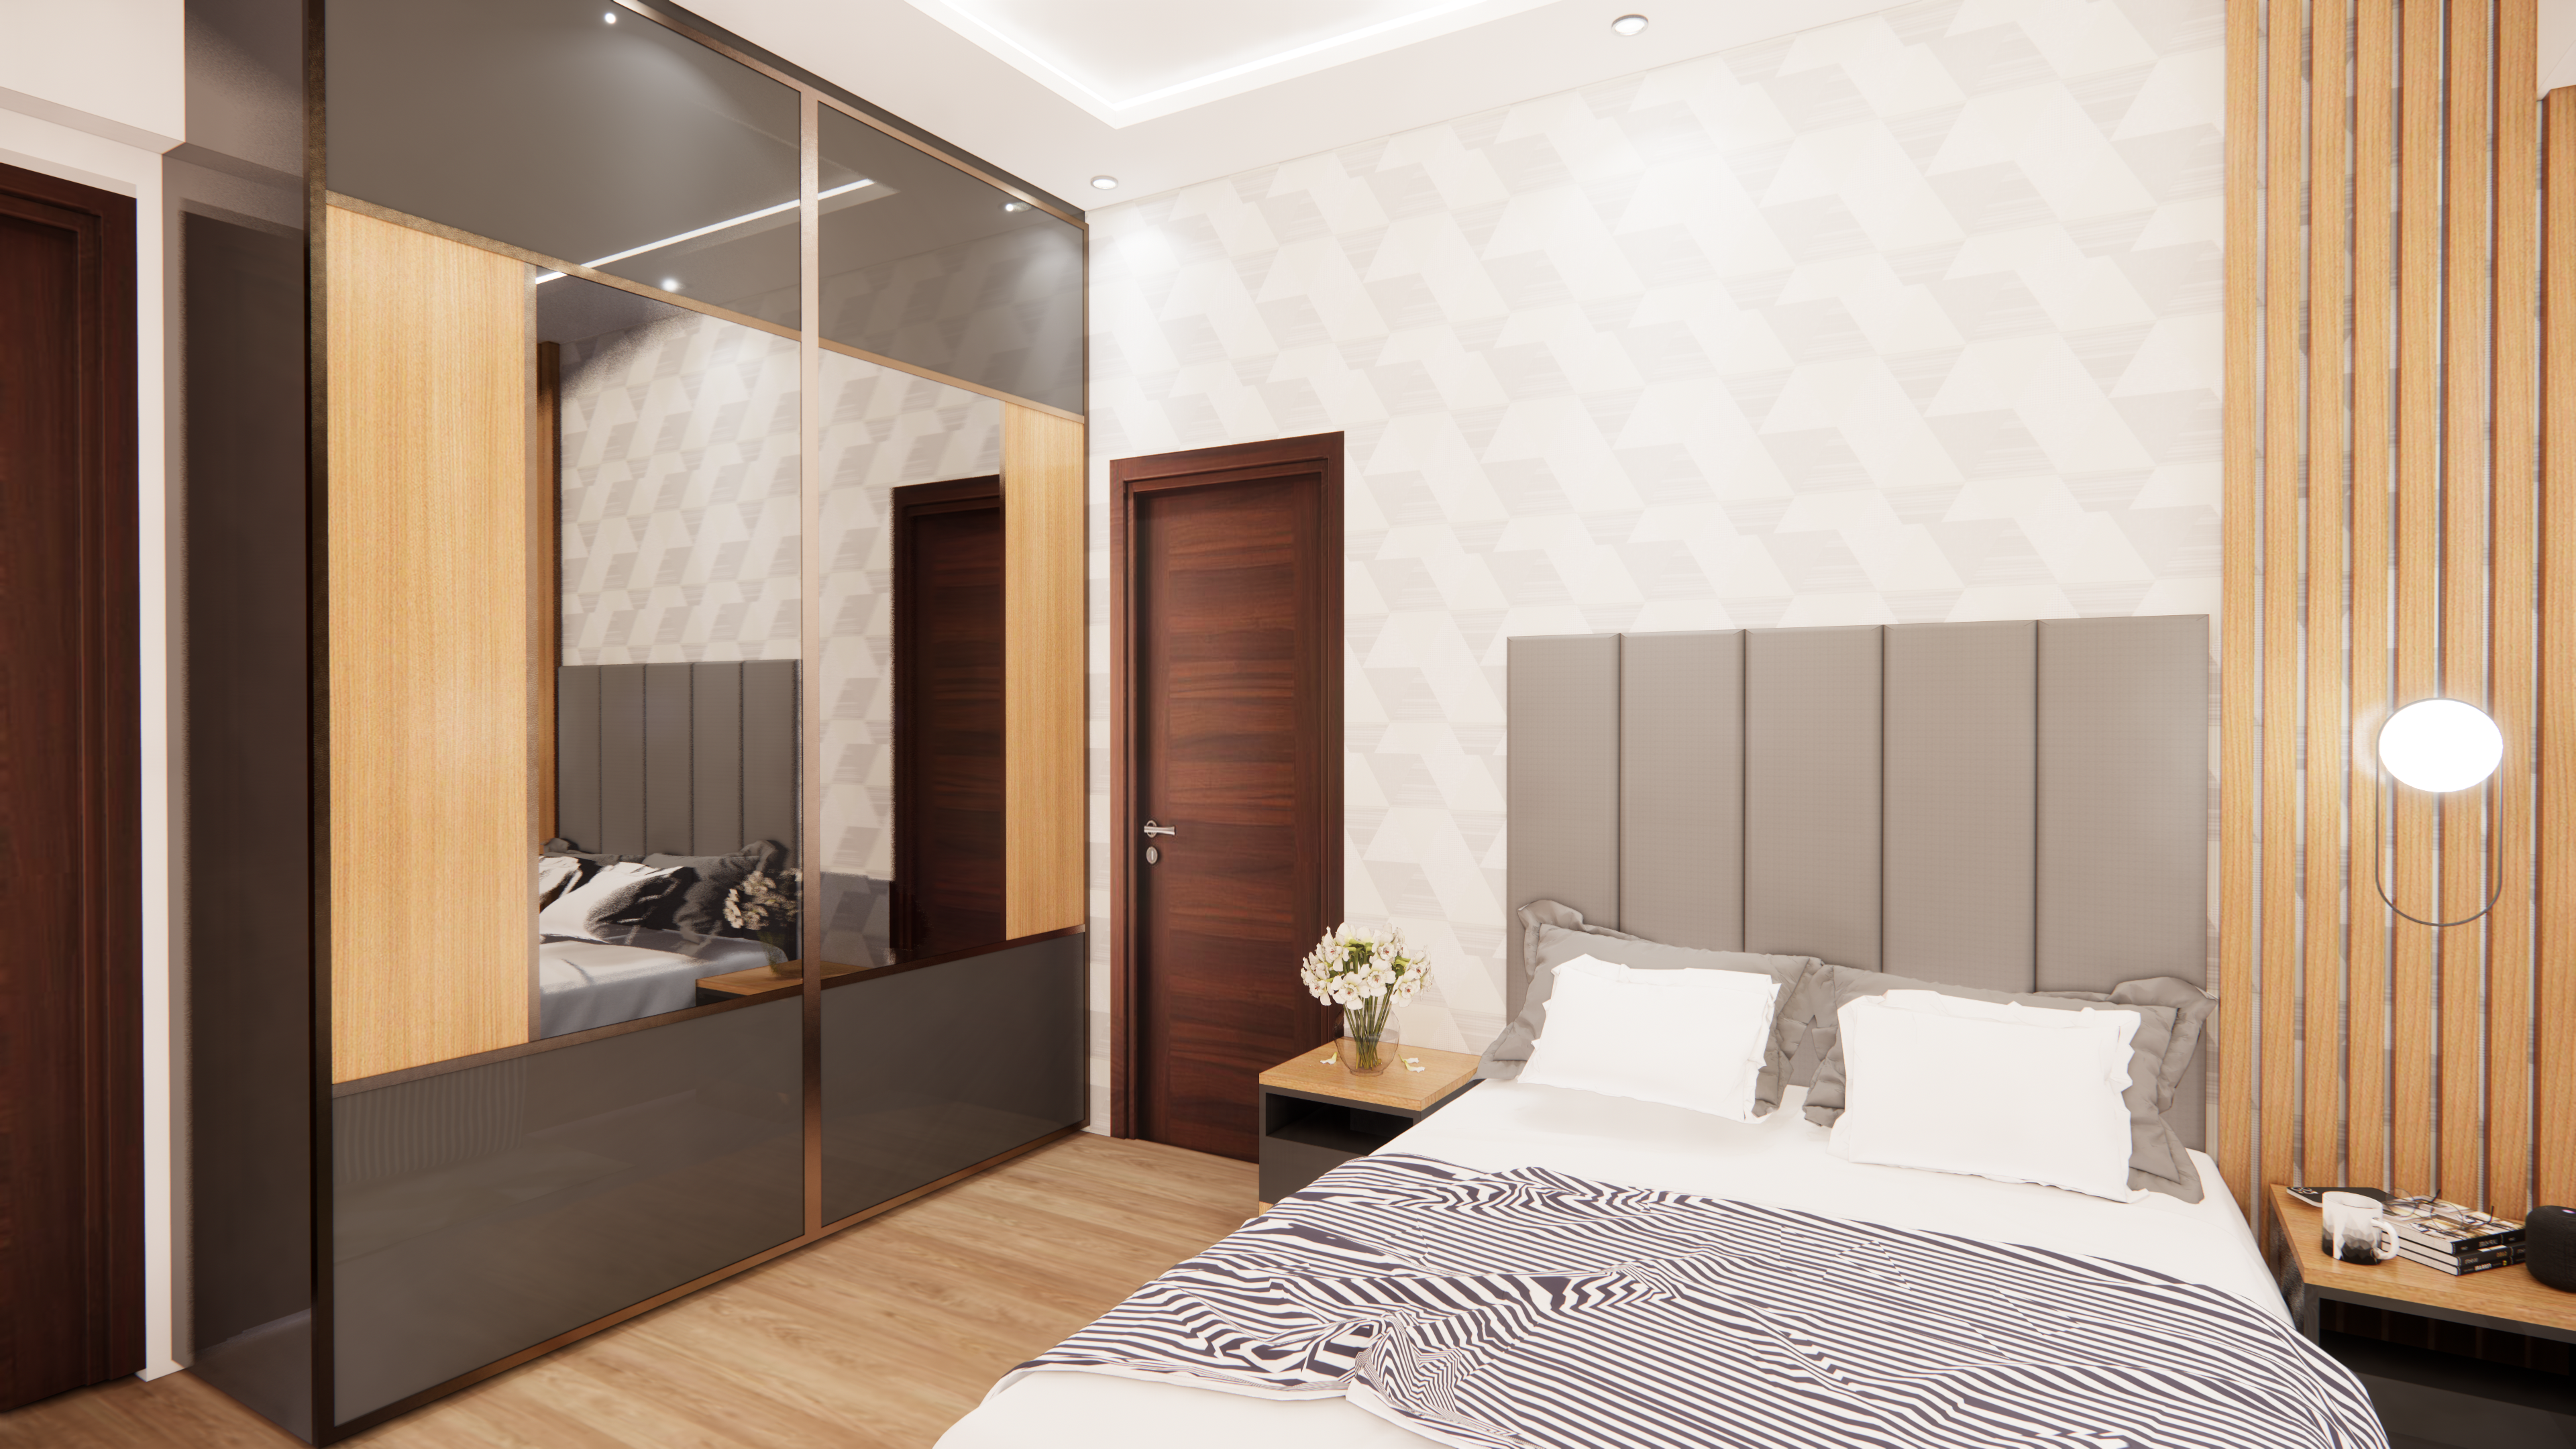 Full View of Bedroom with wardrobe